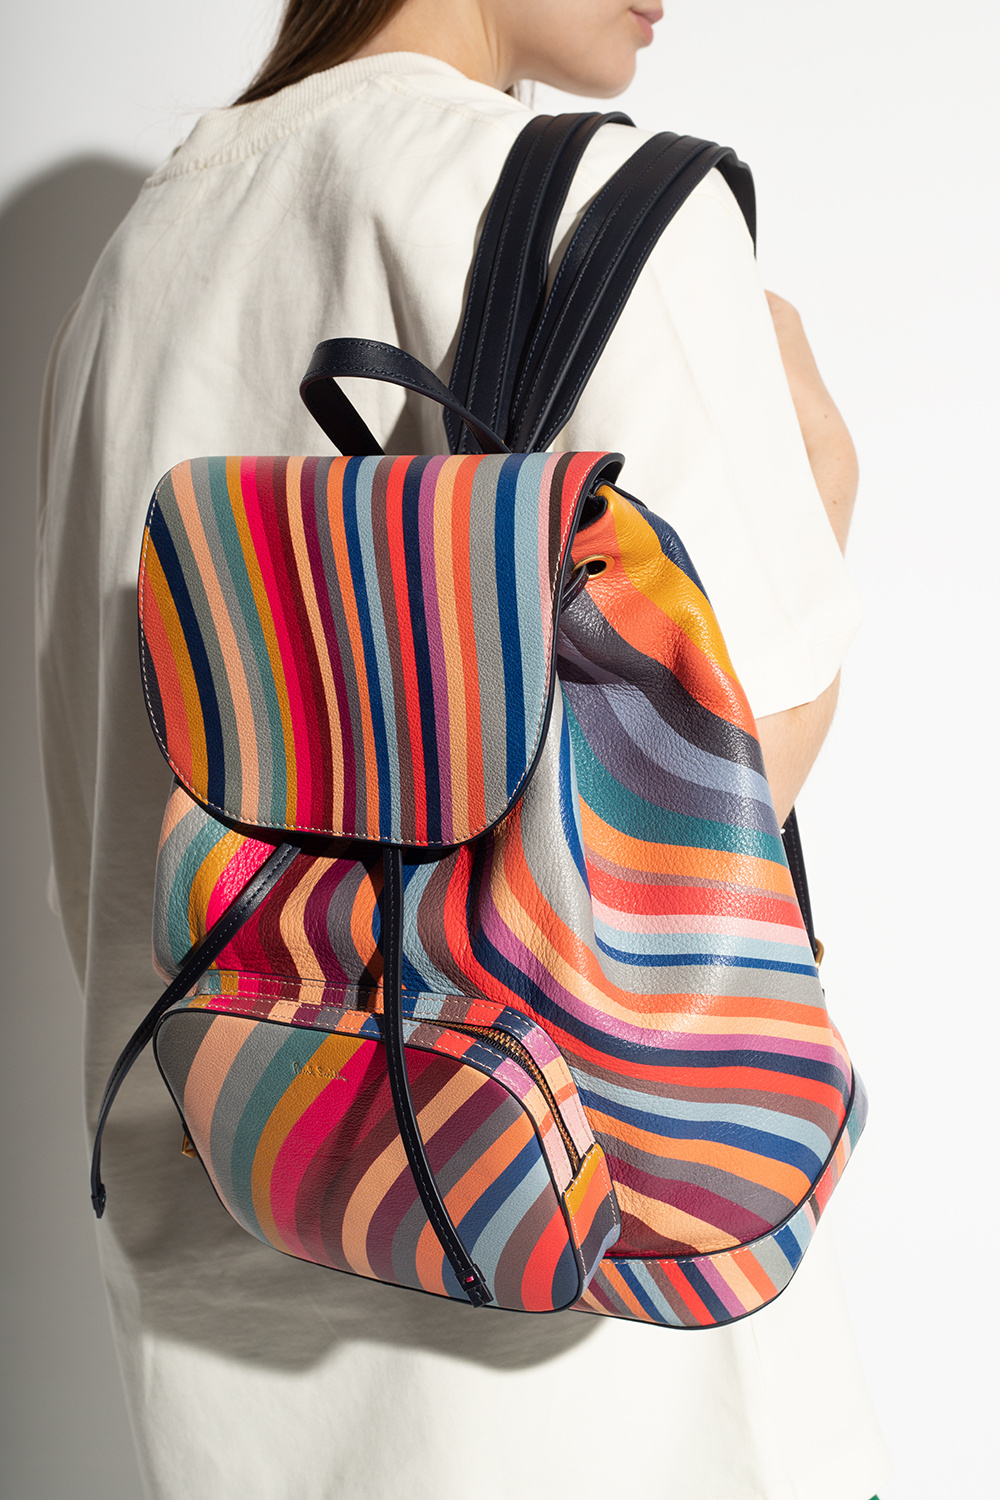 Rook onbetaald Rond en rond Multicolour Backpack with Swirl pattern Paul Smith - Vitkac Italy